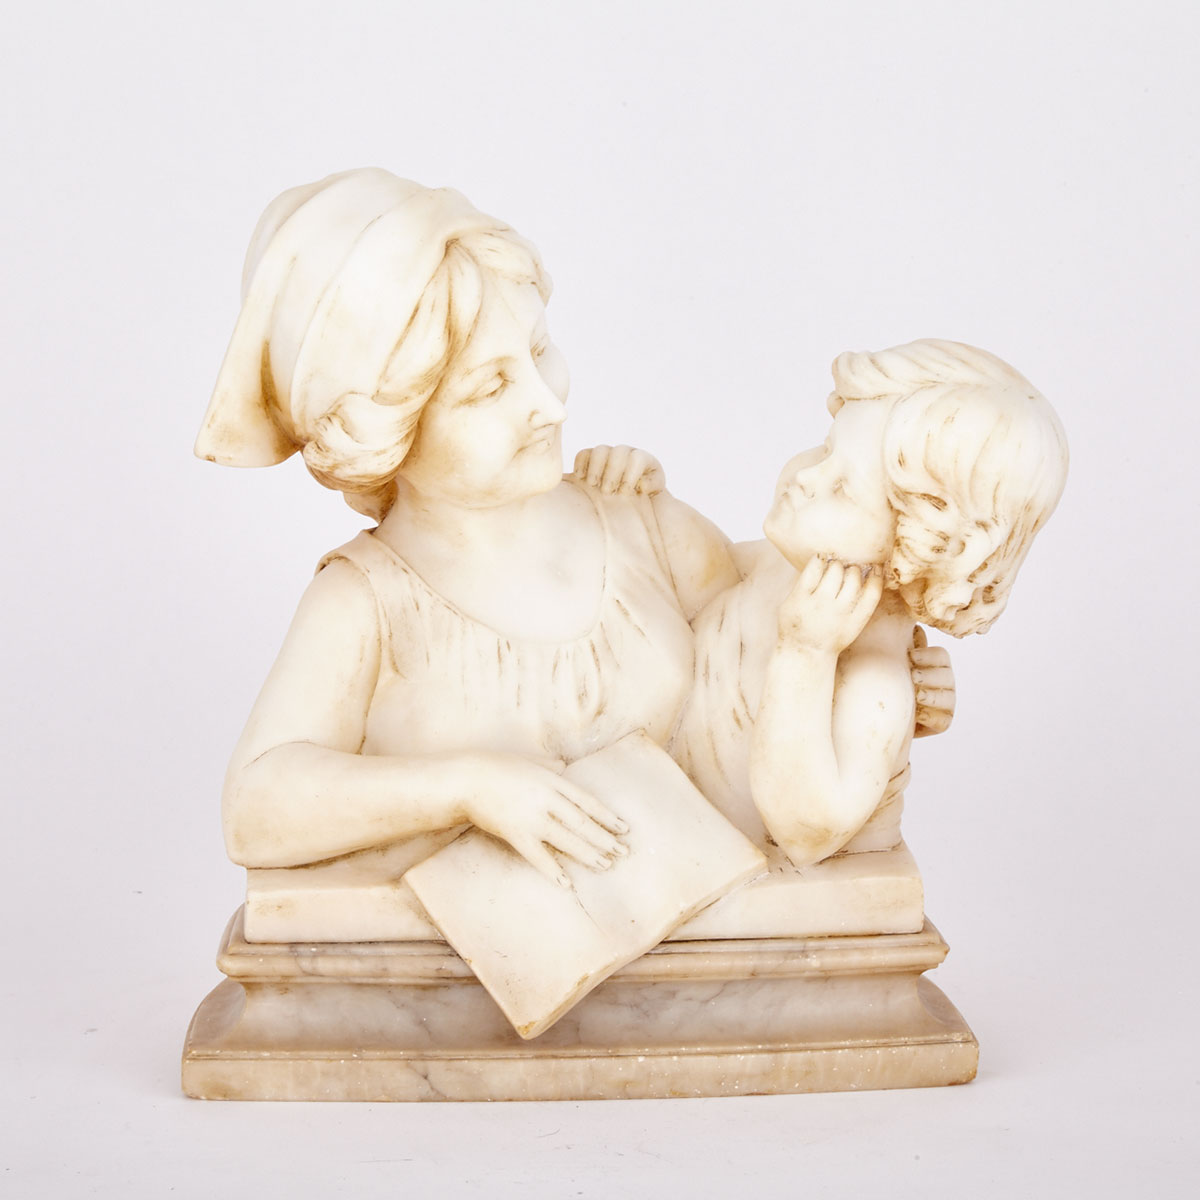 Italian Alabaster Group, ‘The Lesson’, A. Cipriani, early-mid 20th century